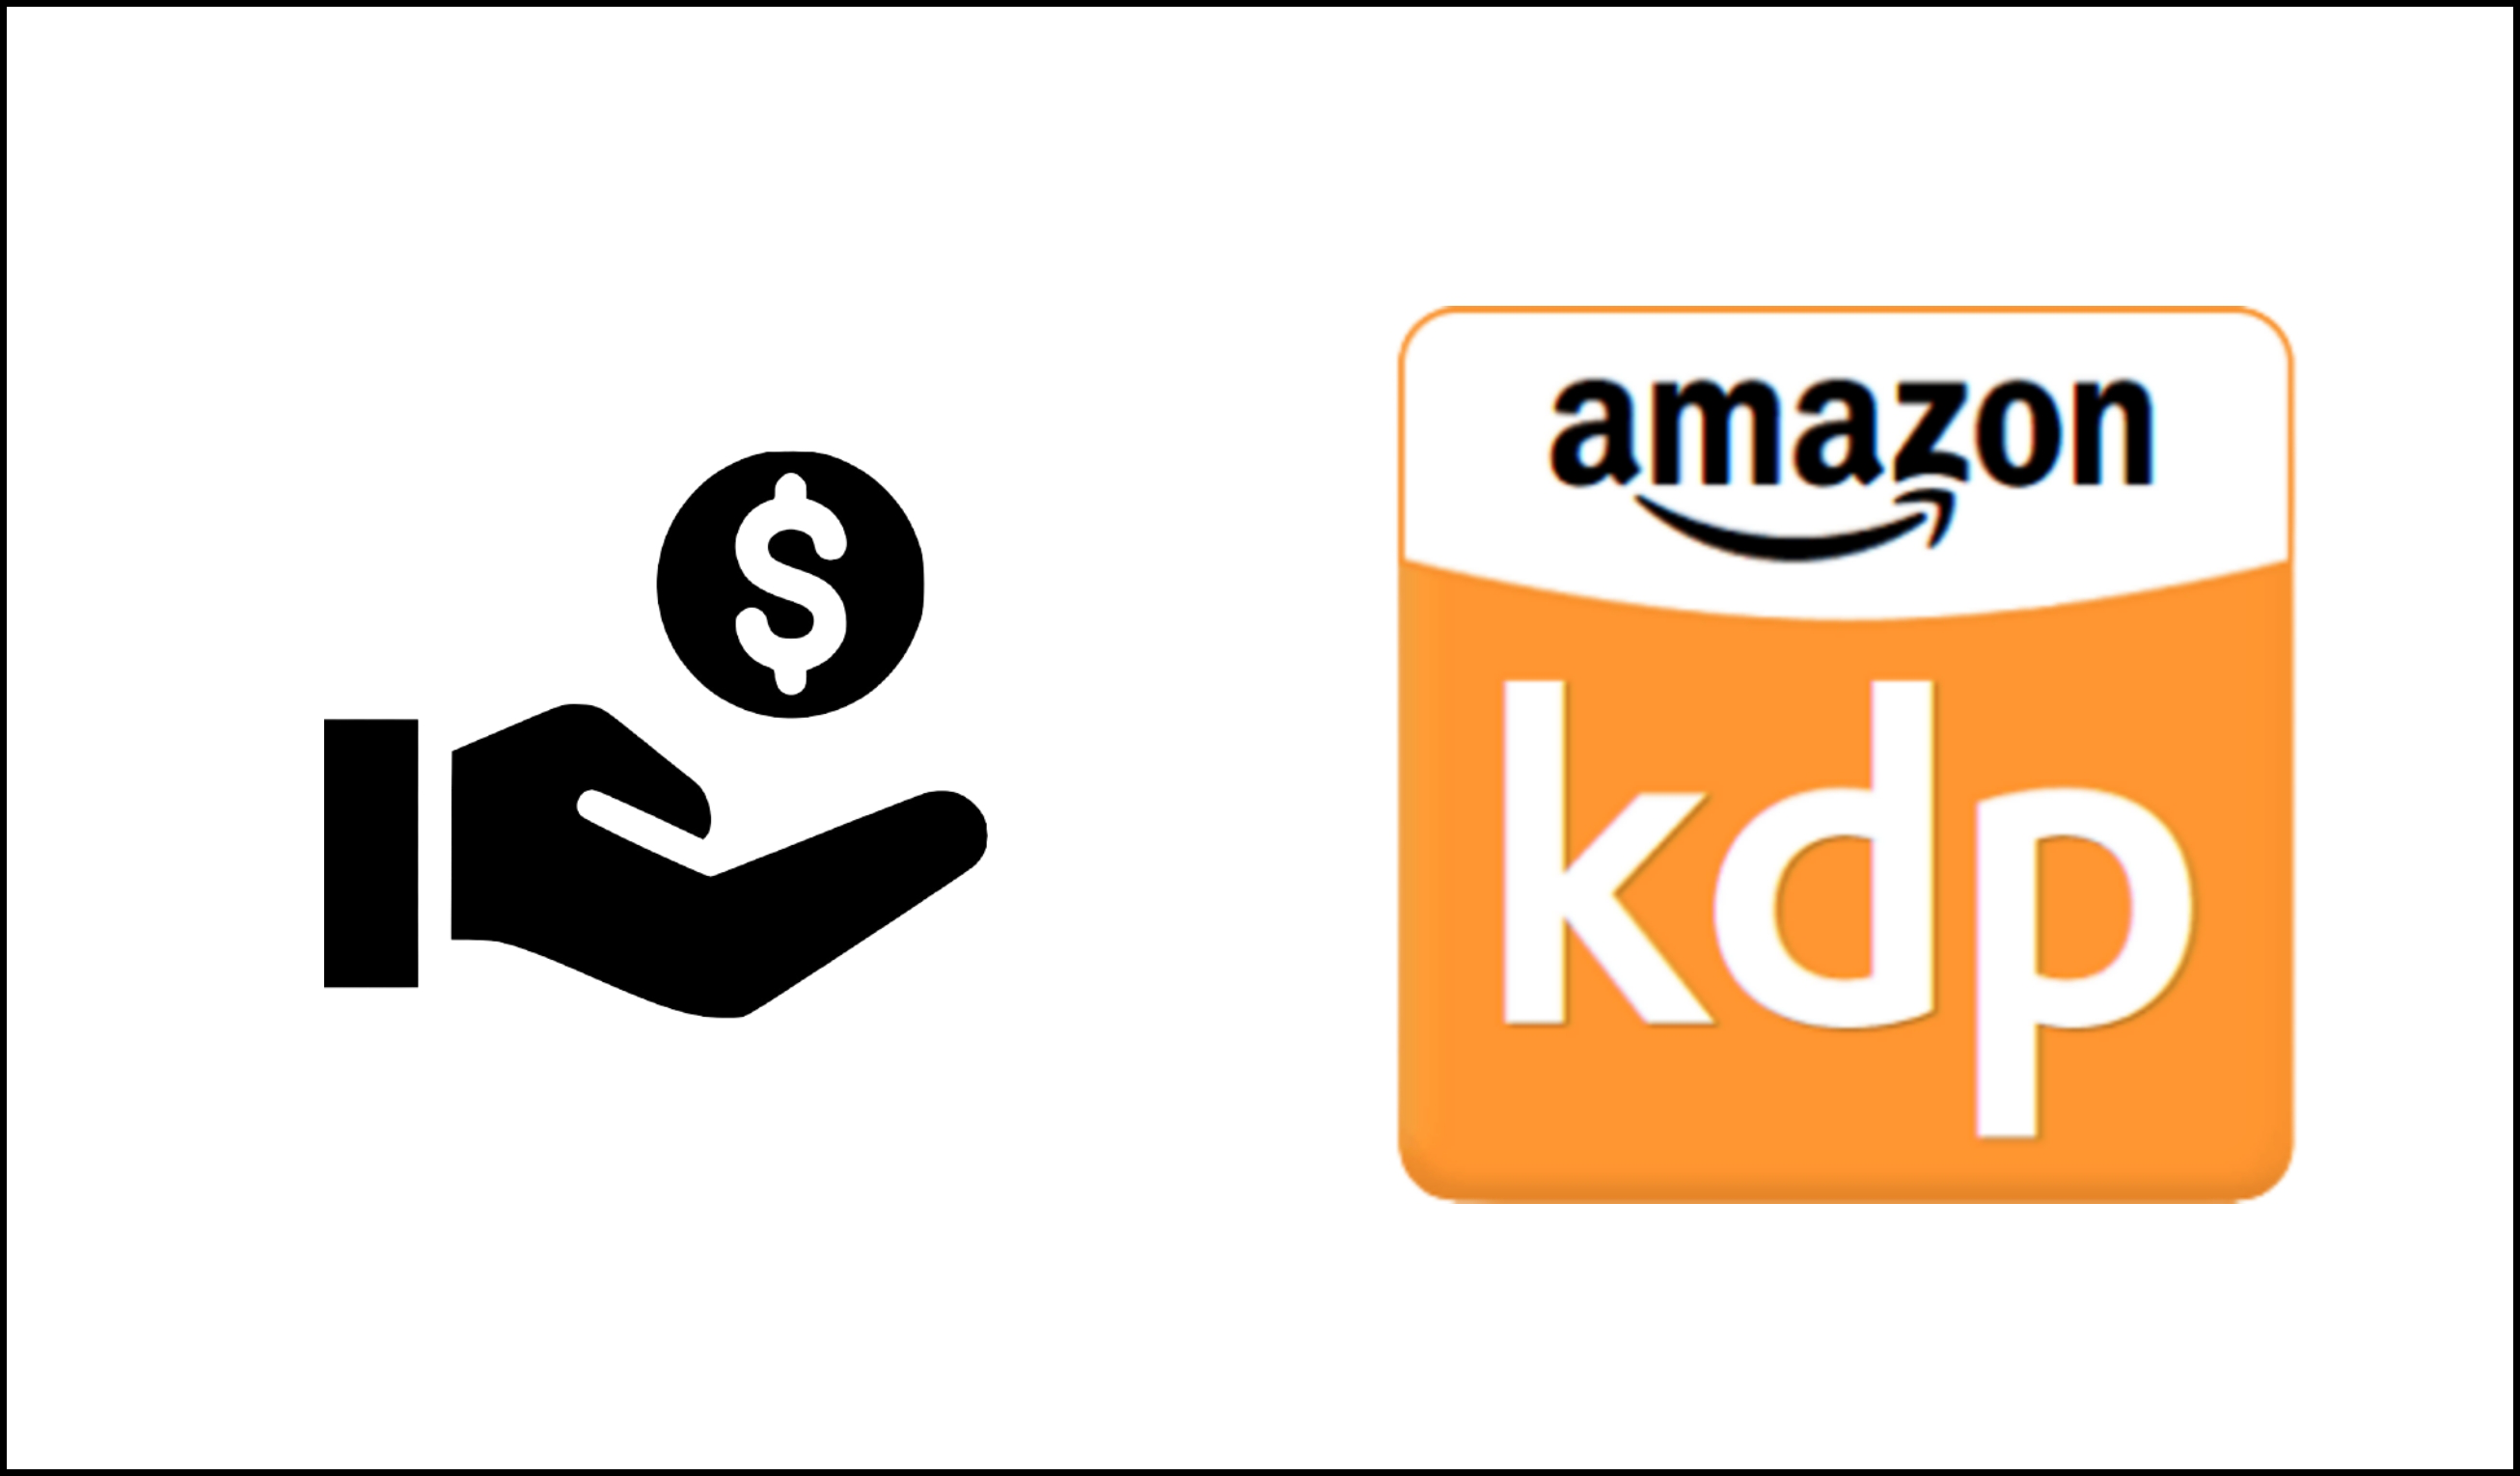 Kdp amazon What Is